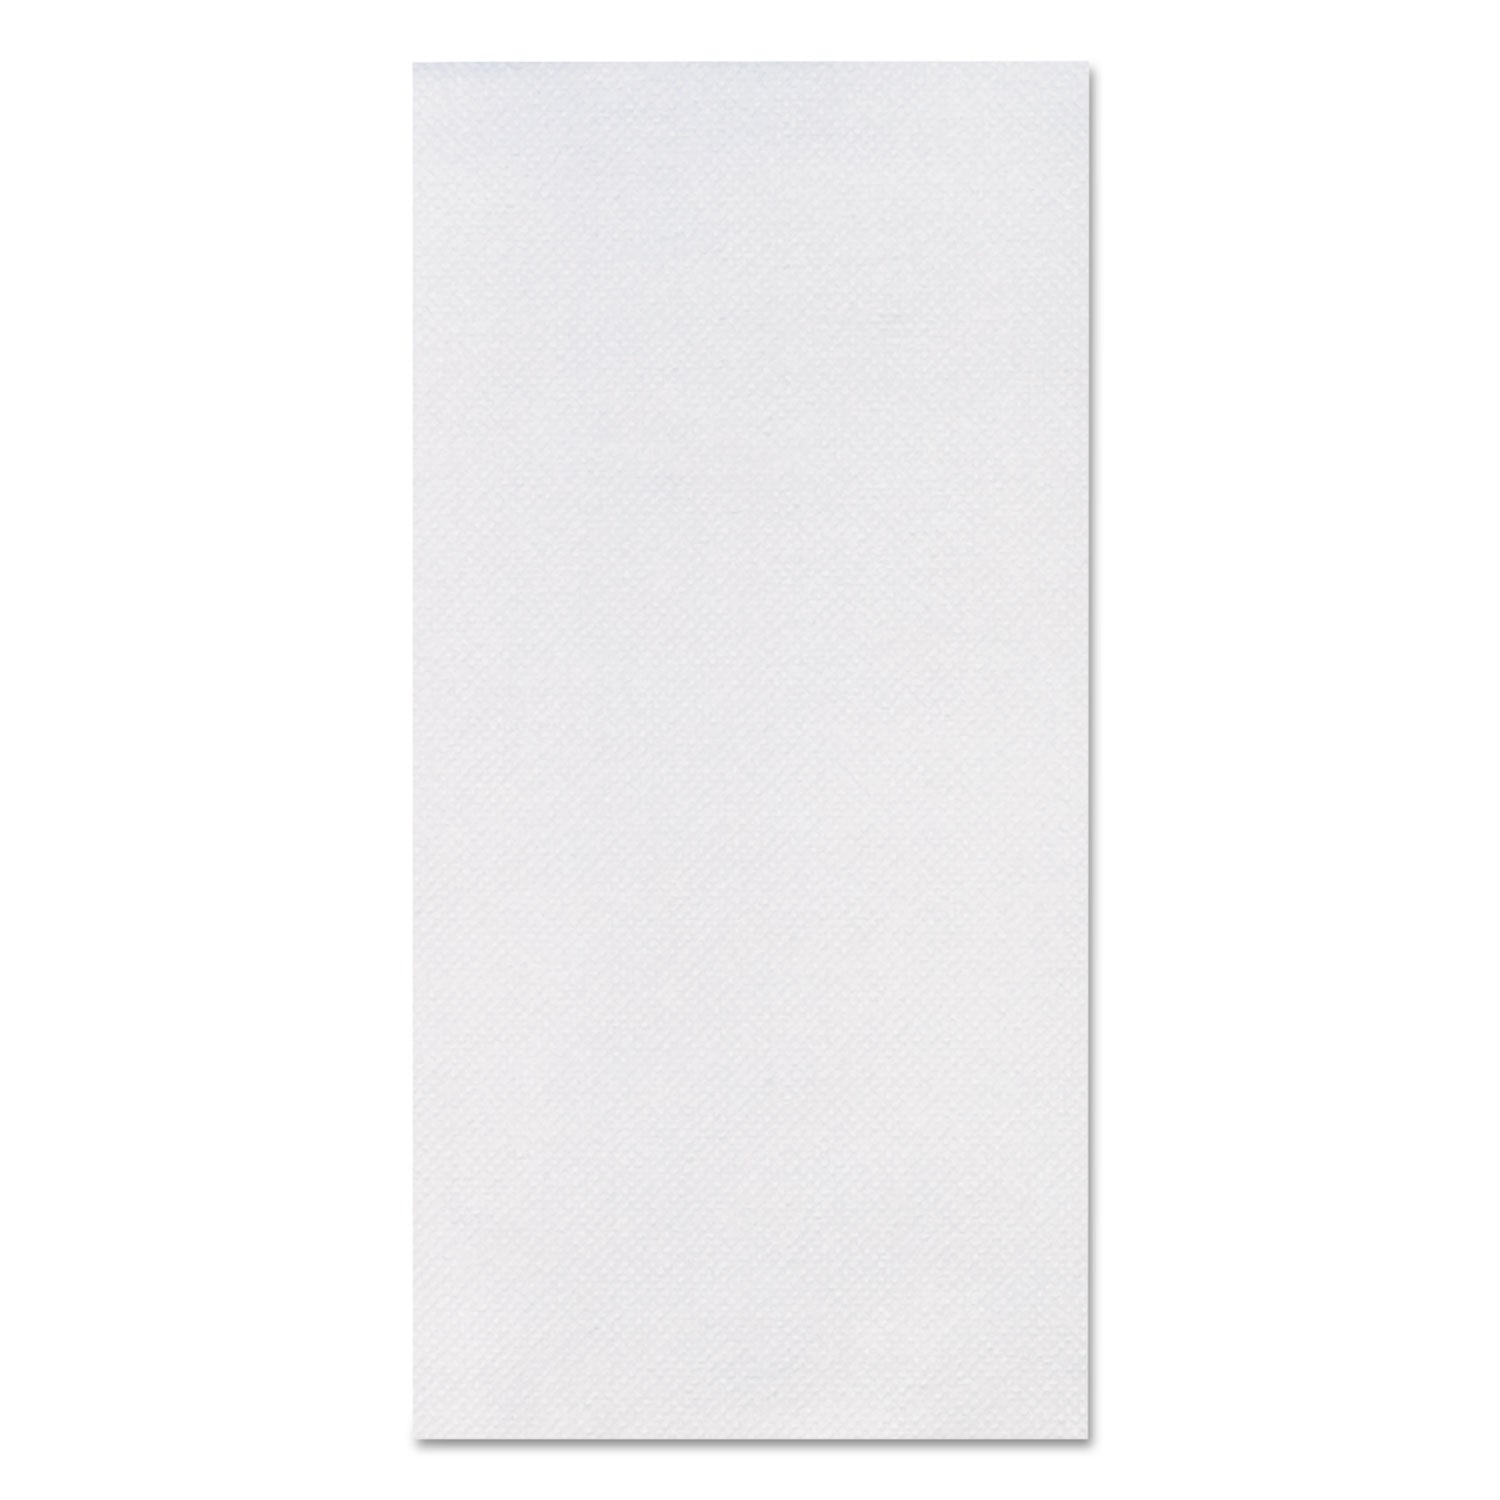 fashnpoint-guest-towels-1-ply-115-x-155-white-100-pack-6-packs-carton_hfmfp1200 - 1